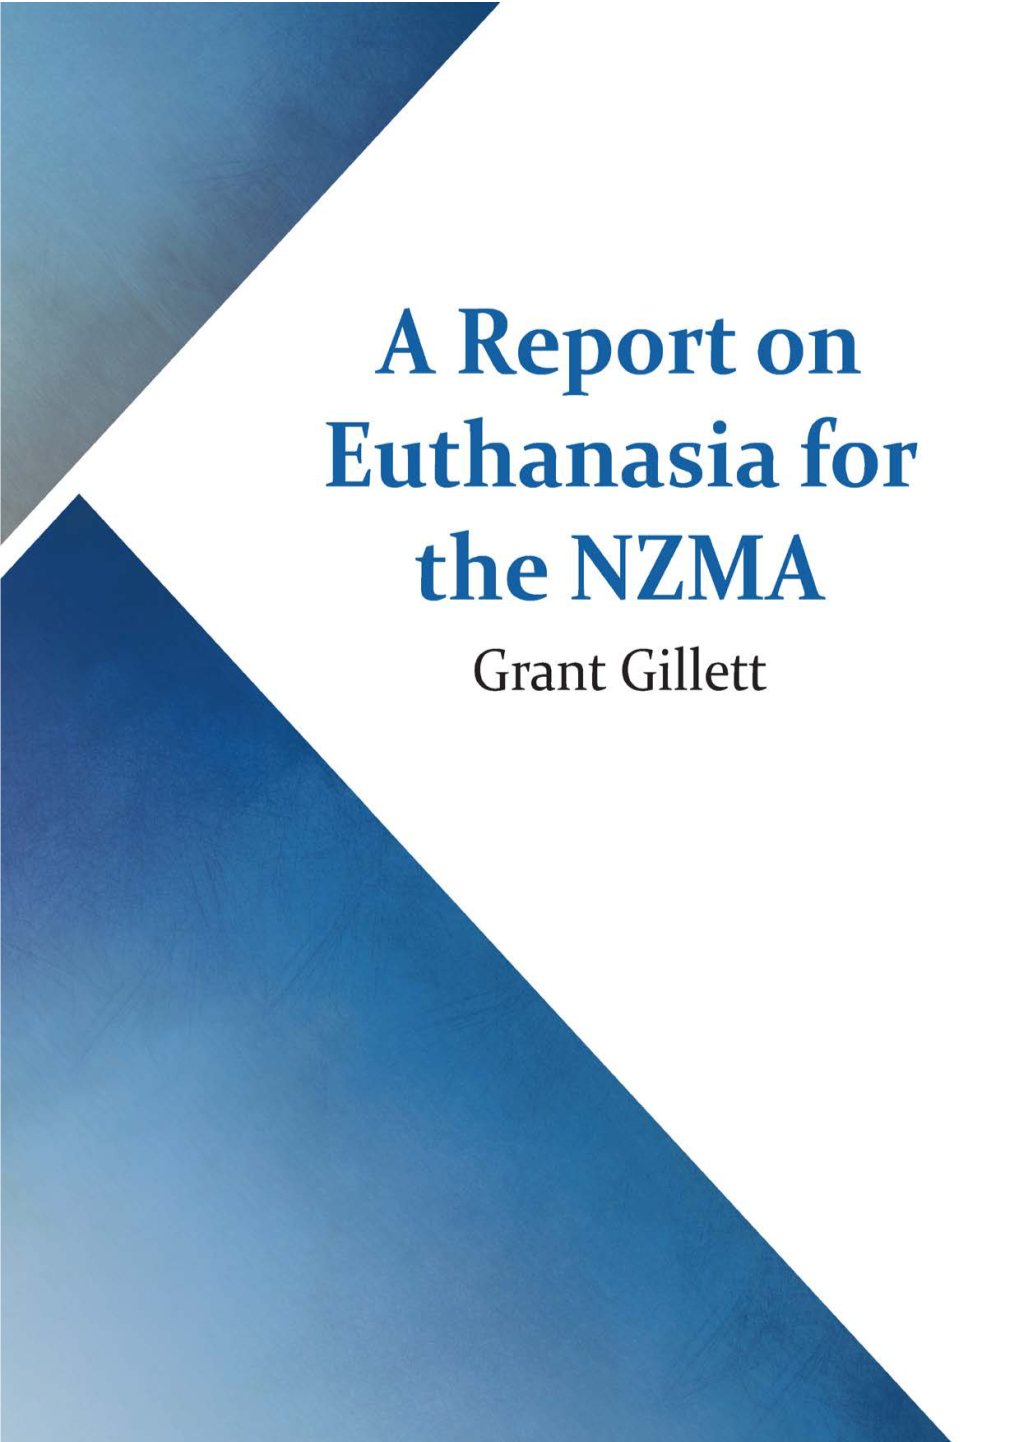 A Report on Euthanasia for the NZMA